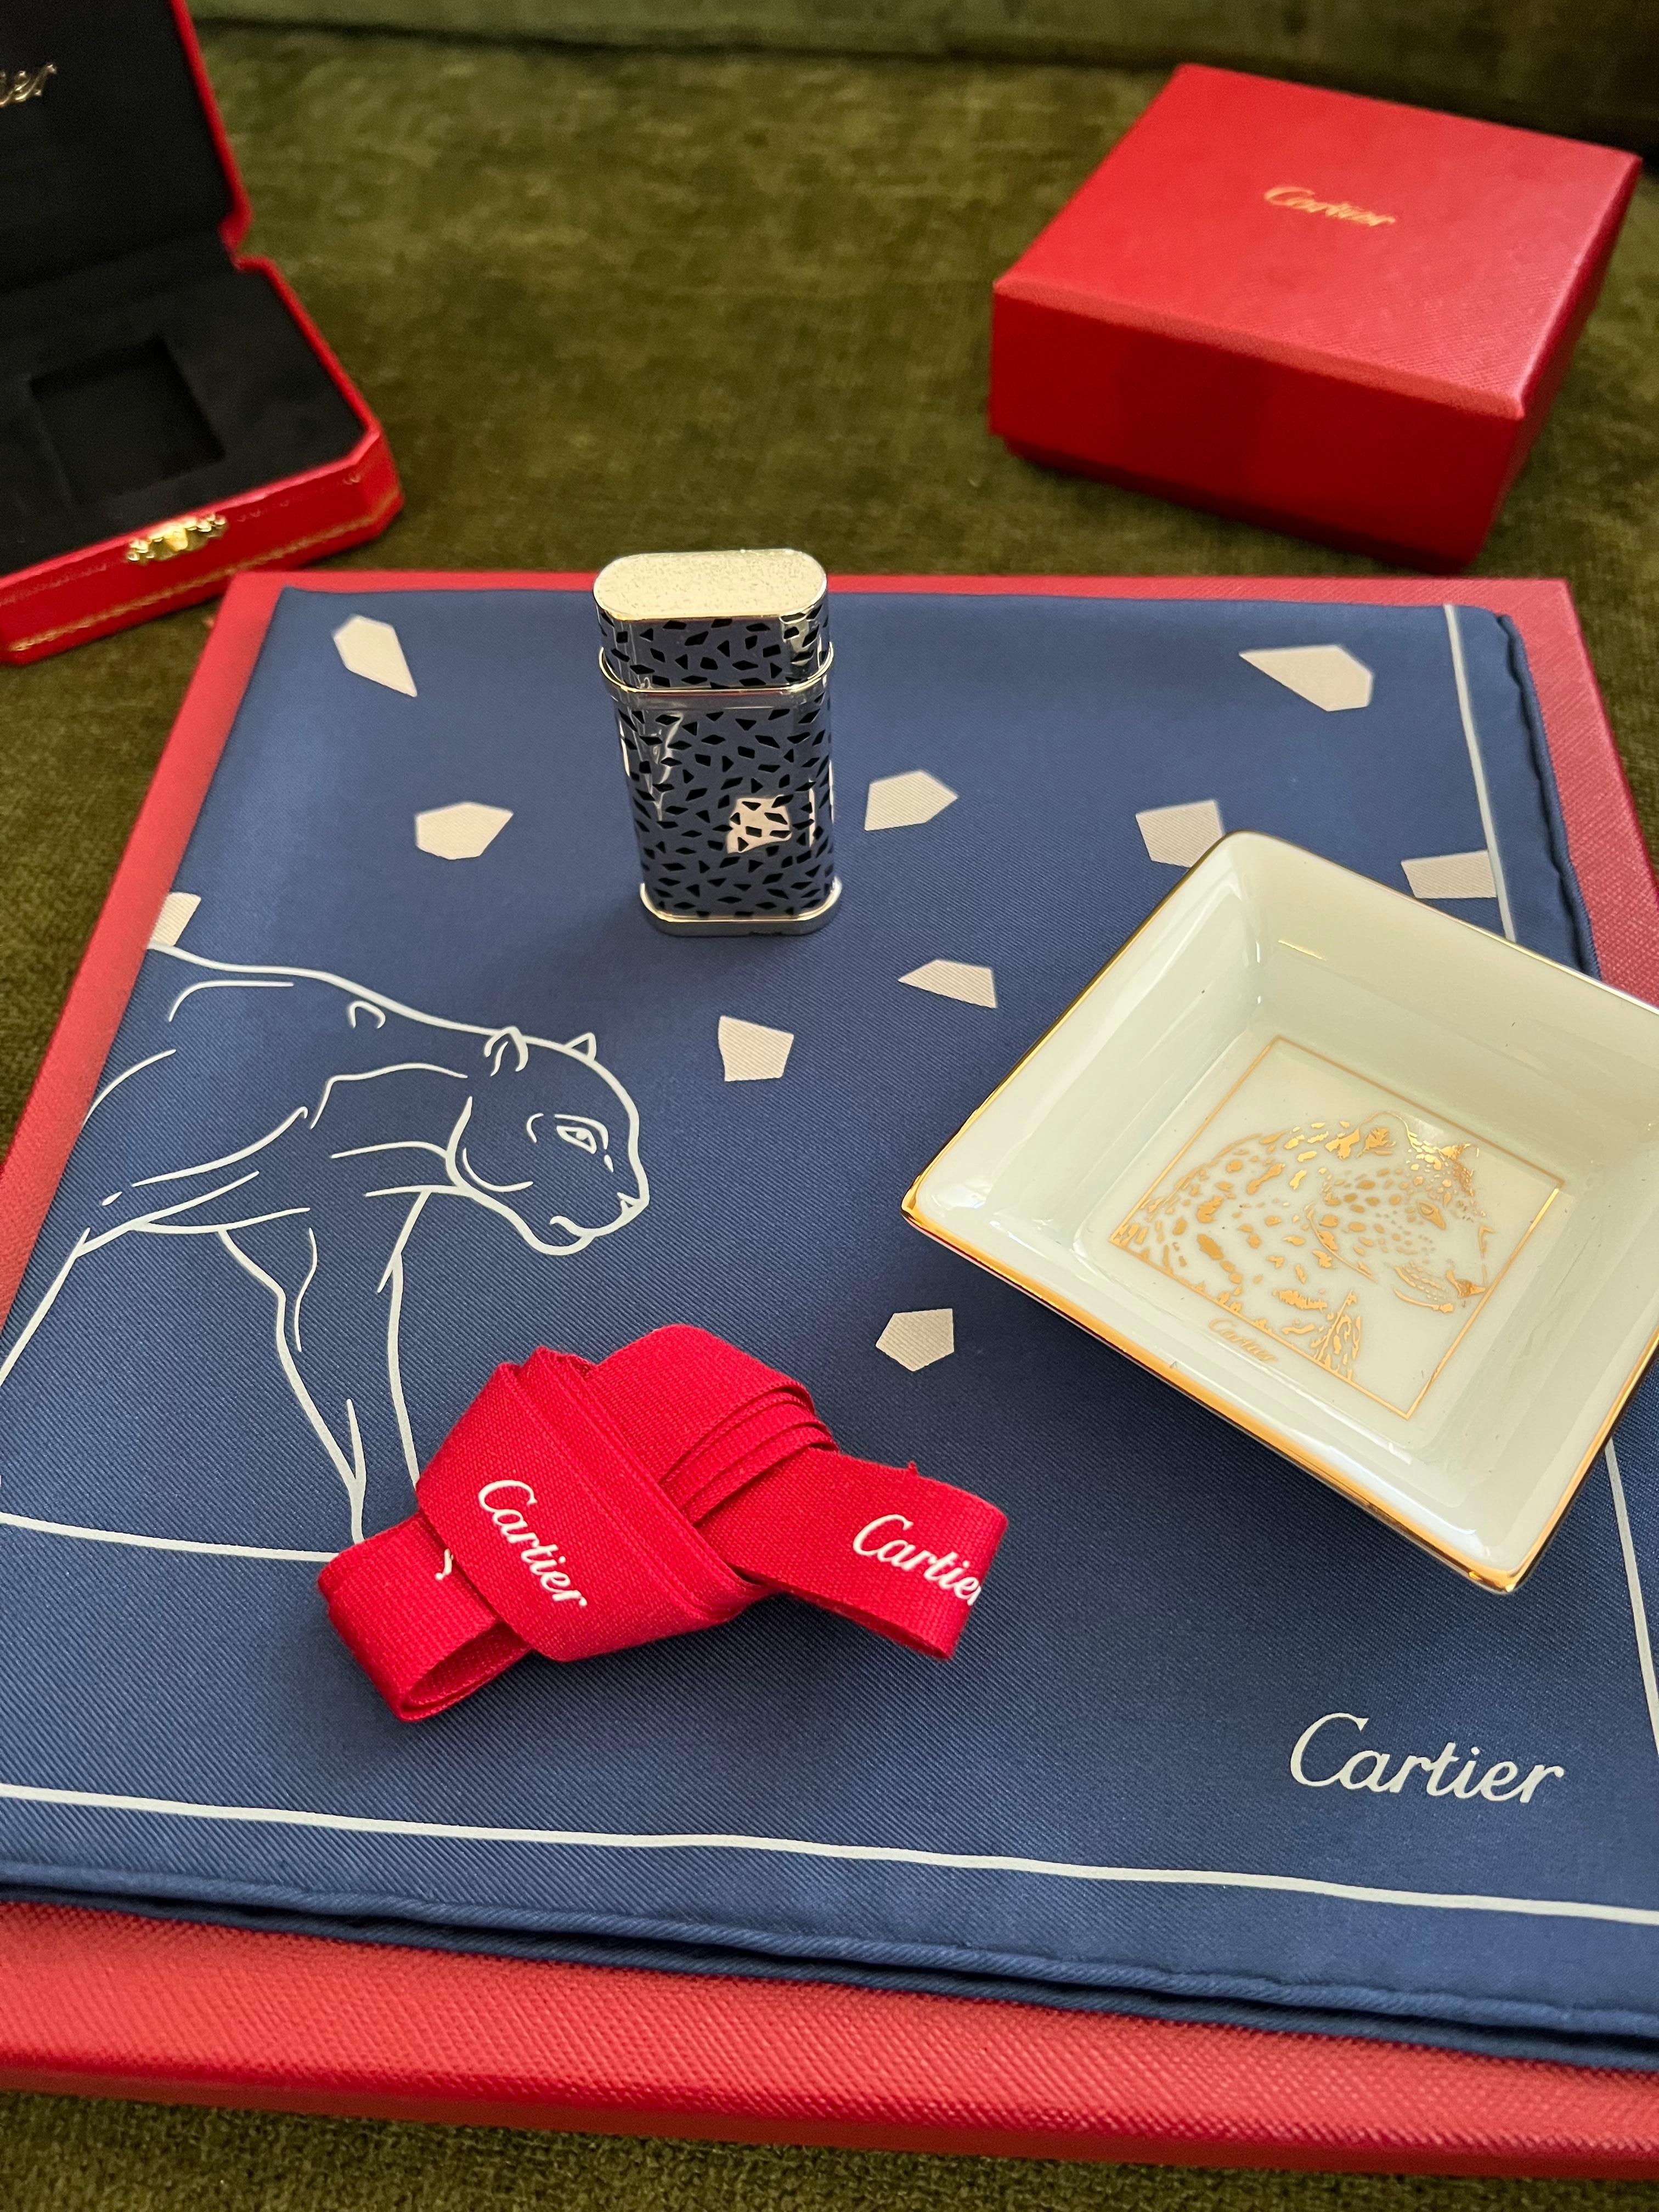 Artist Cartier “Panthera“ Set of Lighter, Ashtray & Silk Scarf For Sale